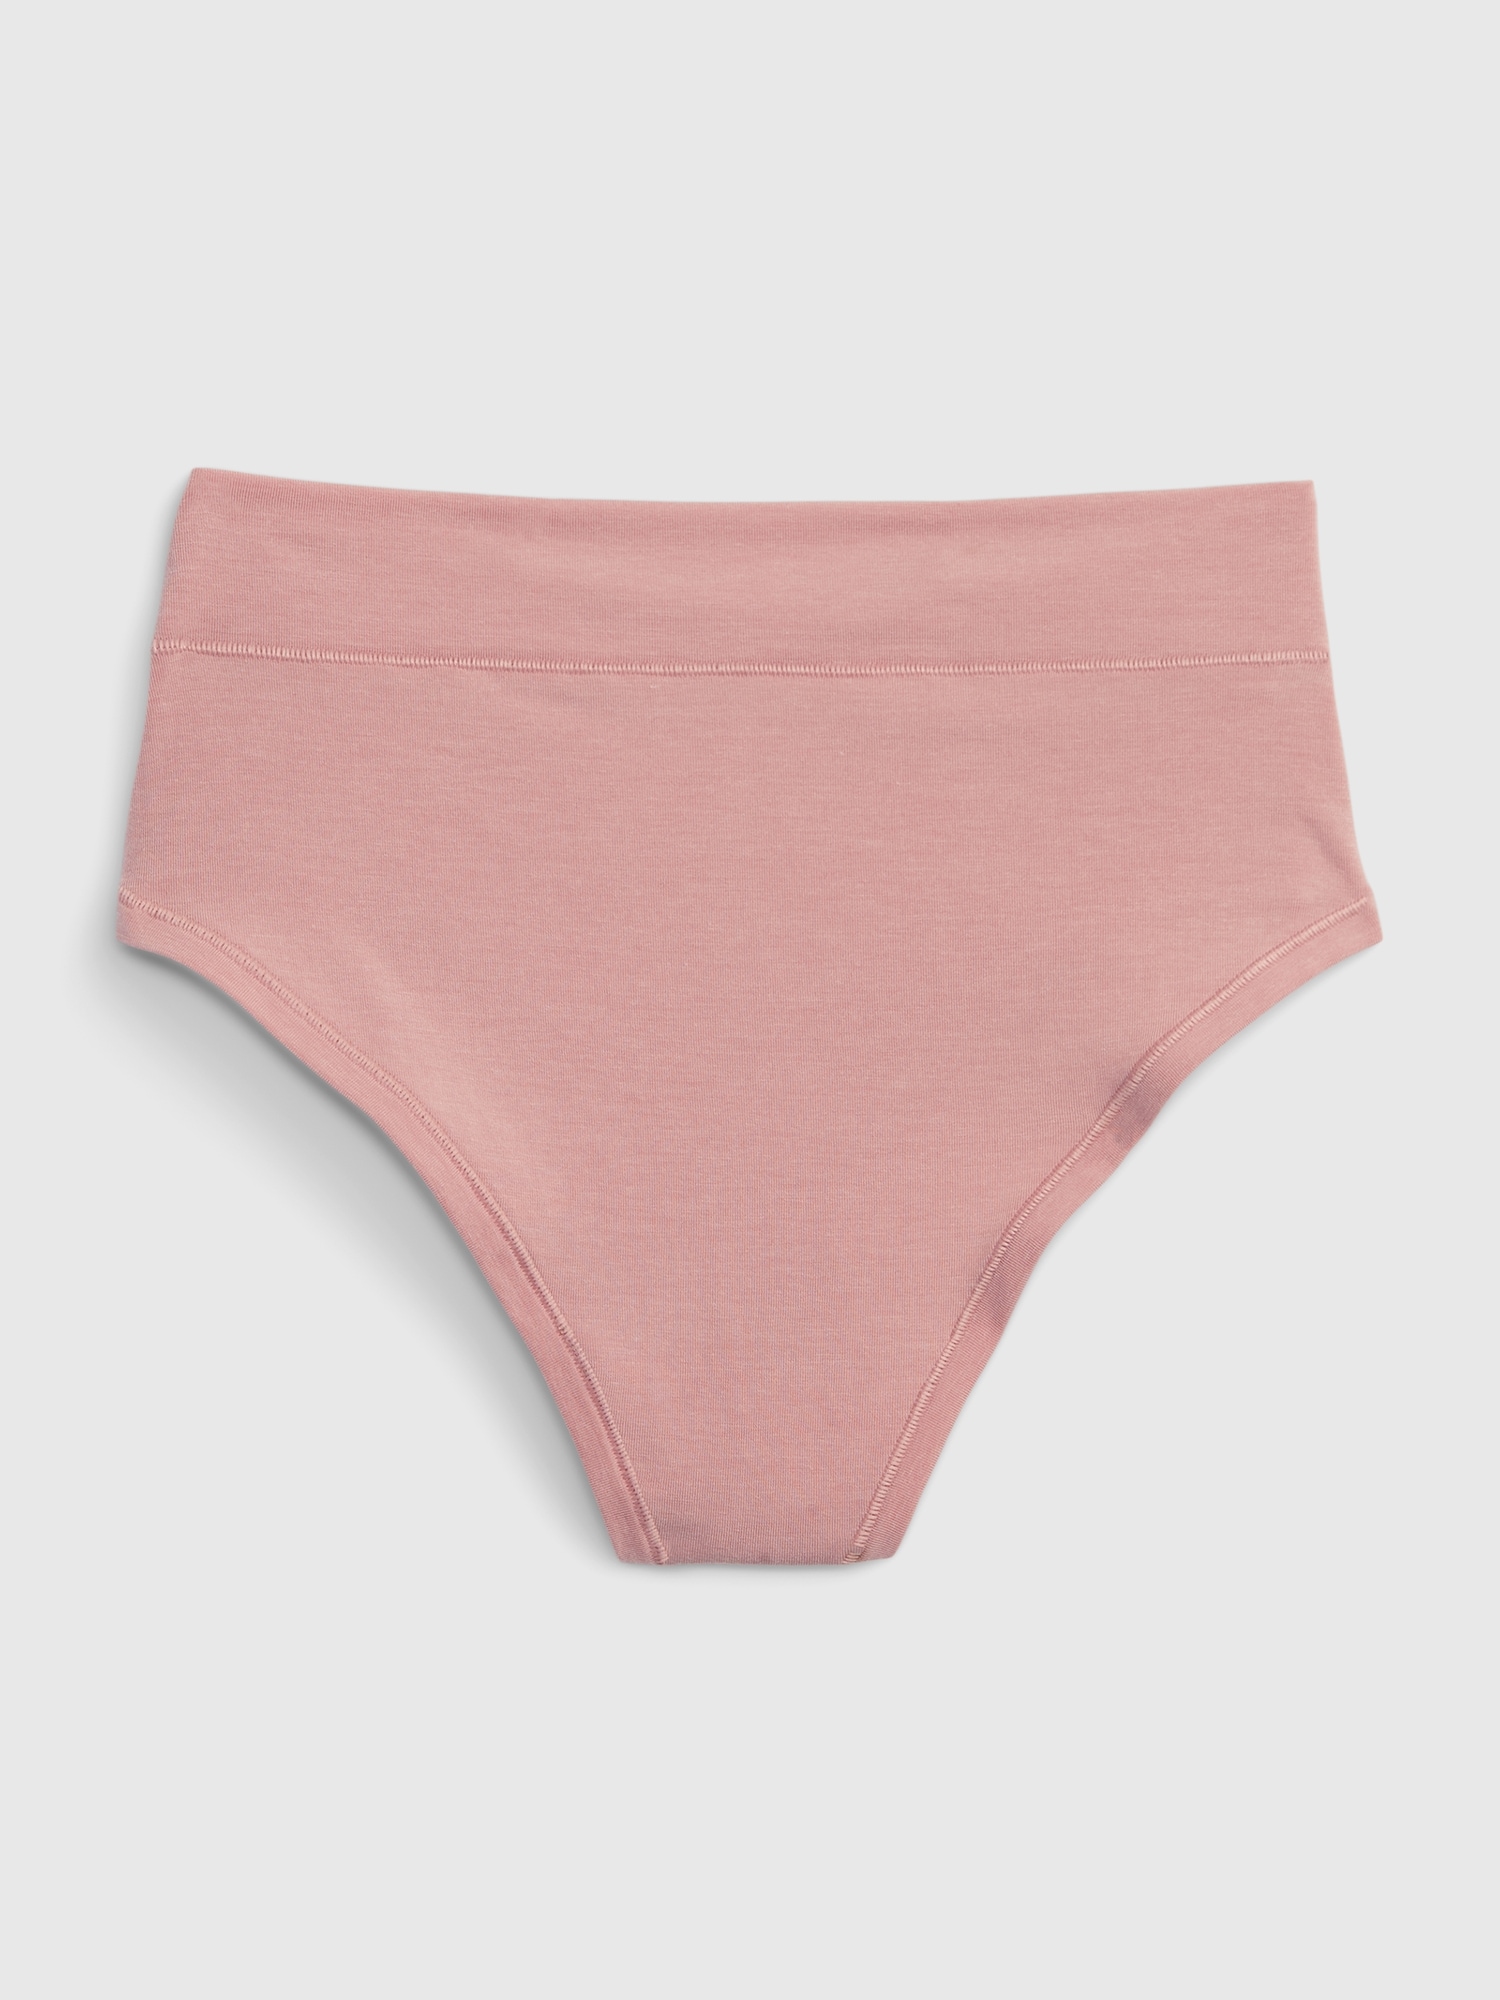 Gap Breathe High Rise Thong In Passion Rose Pink